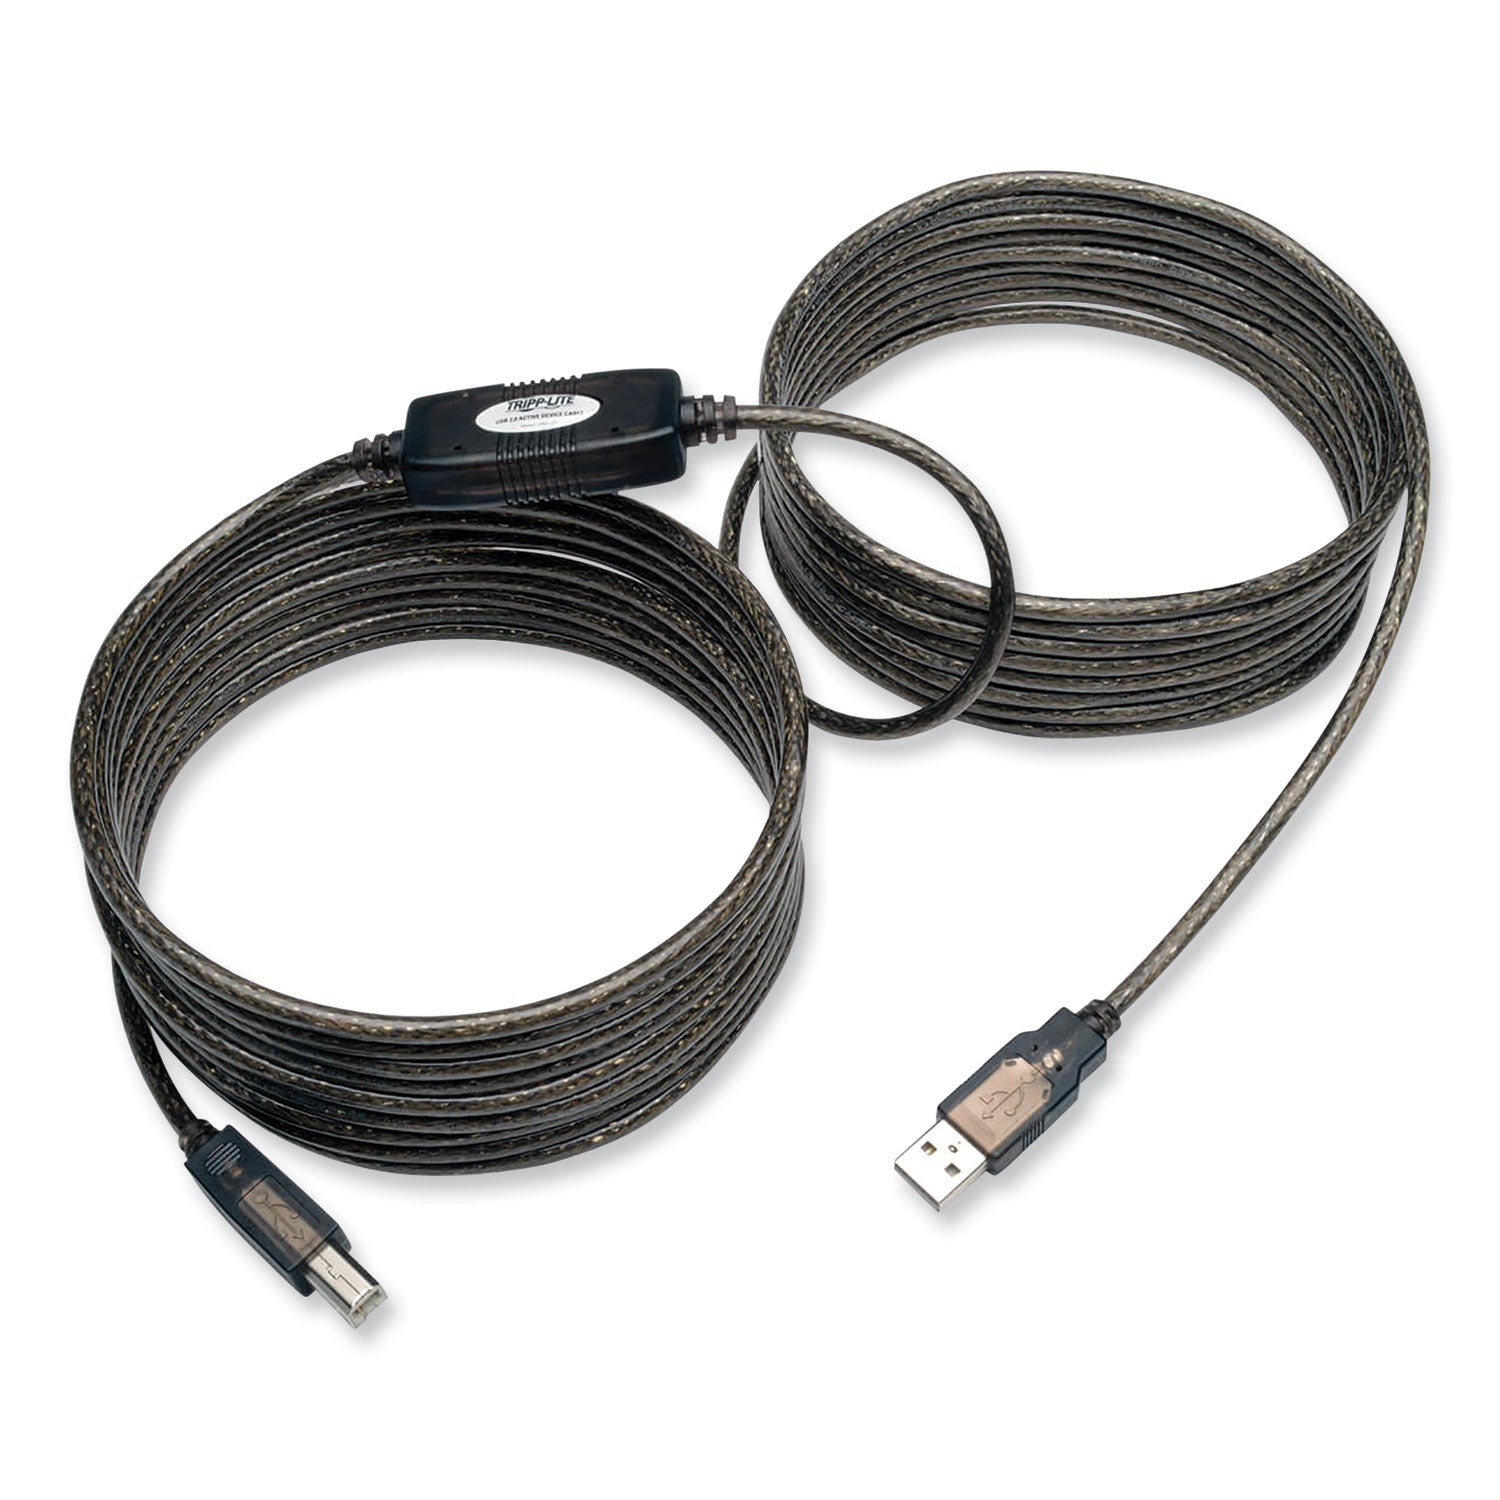 USB 2.0 Active Repeater Cable, A to B (M/M), 25 ft, Black - 